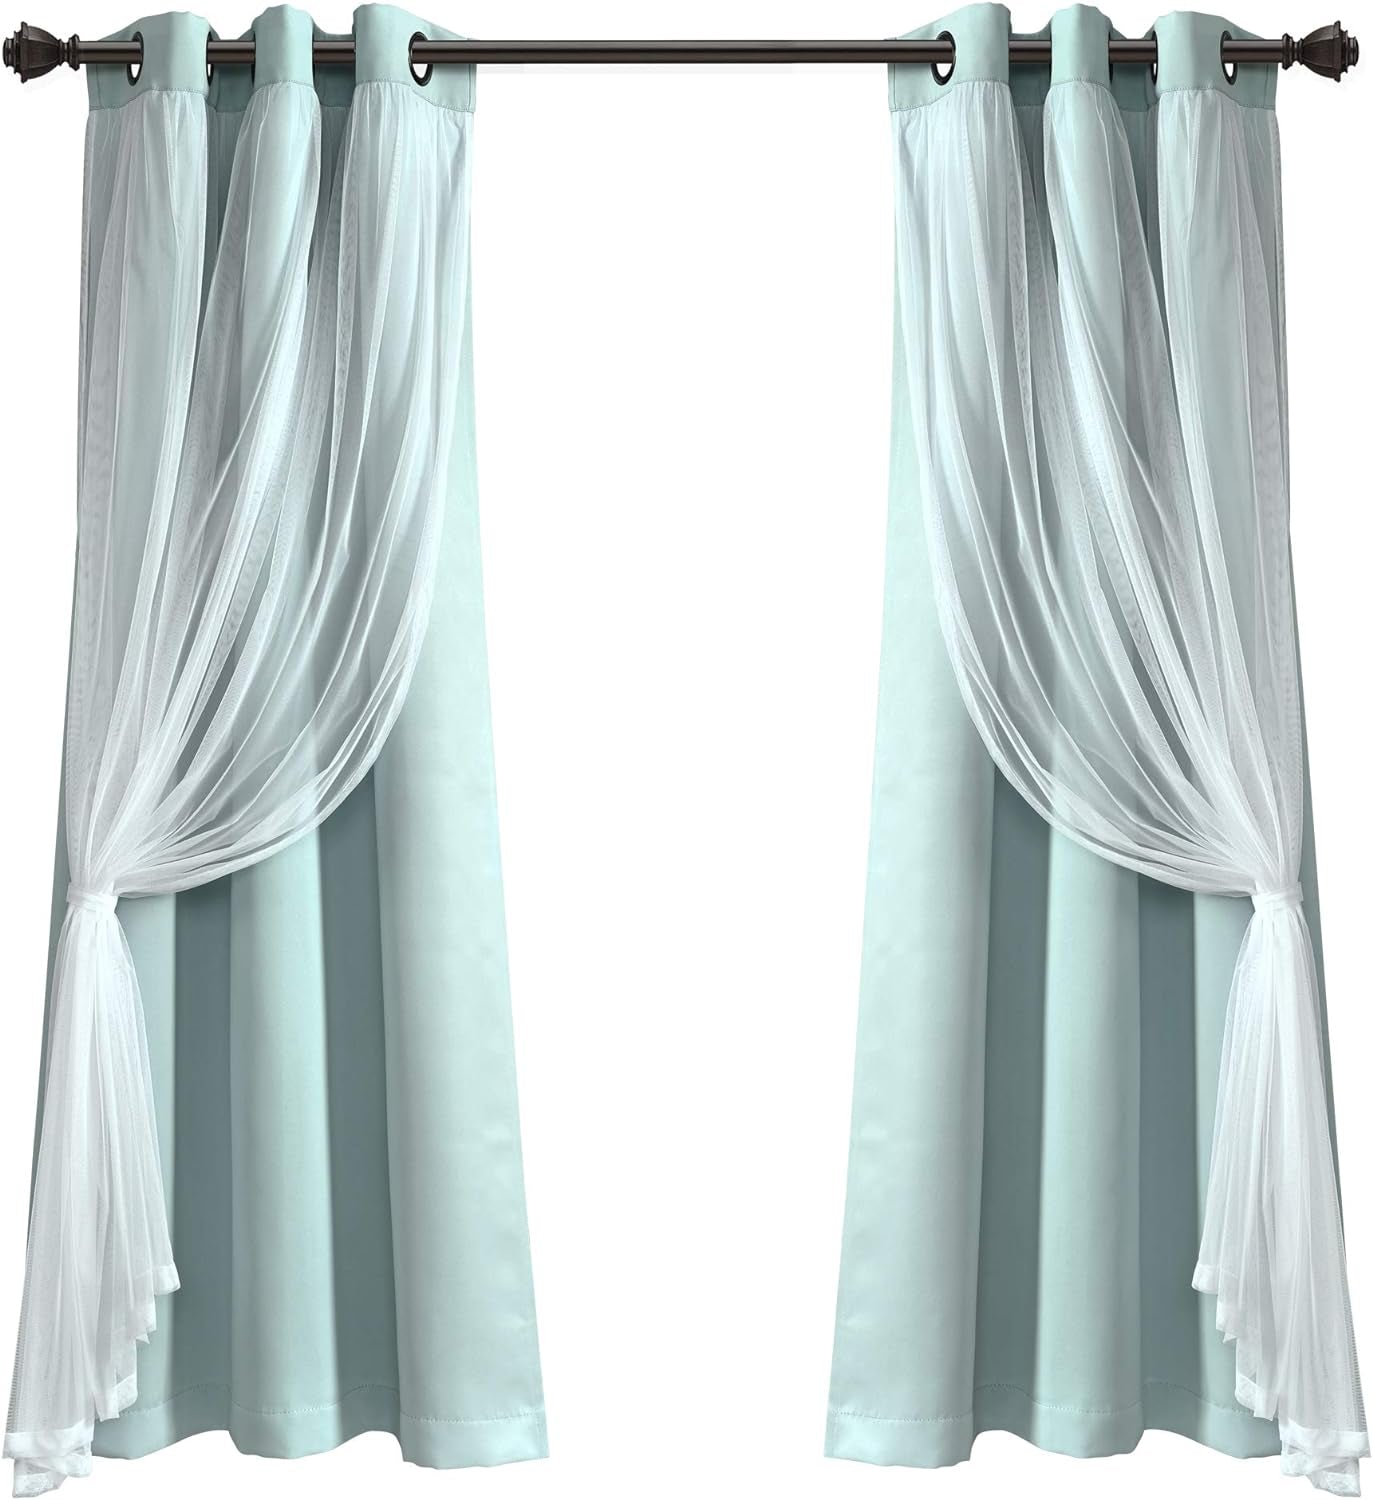 Sheer Grommet Curtains with Insulated Blackout Lining, Window Curtain Panels, Pair, 38"W X 63"L, Blue- Curtain with Sheer Overlay, Elegant Blackout Curtains for Bedroom